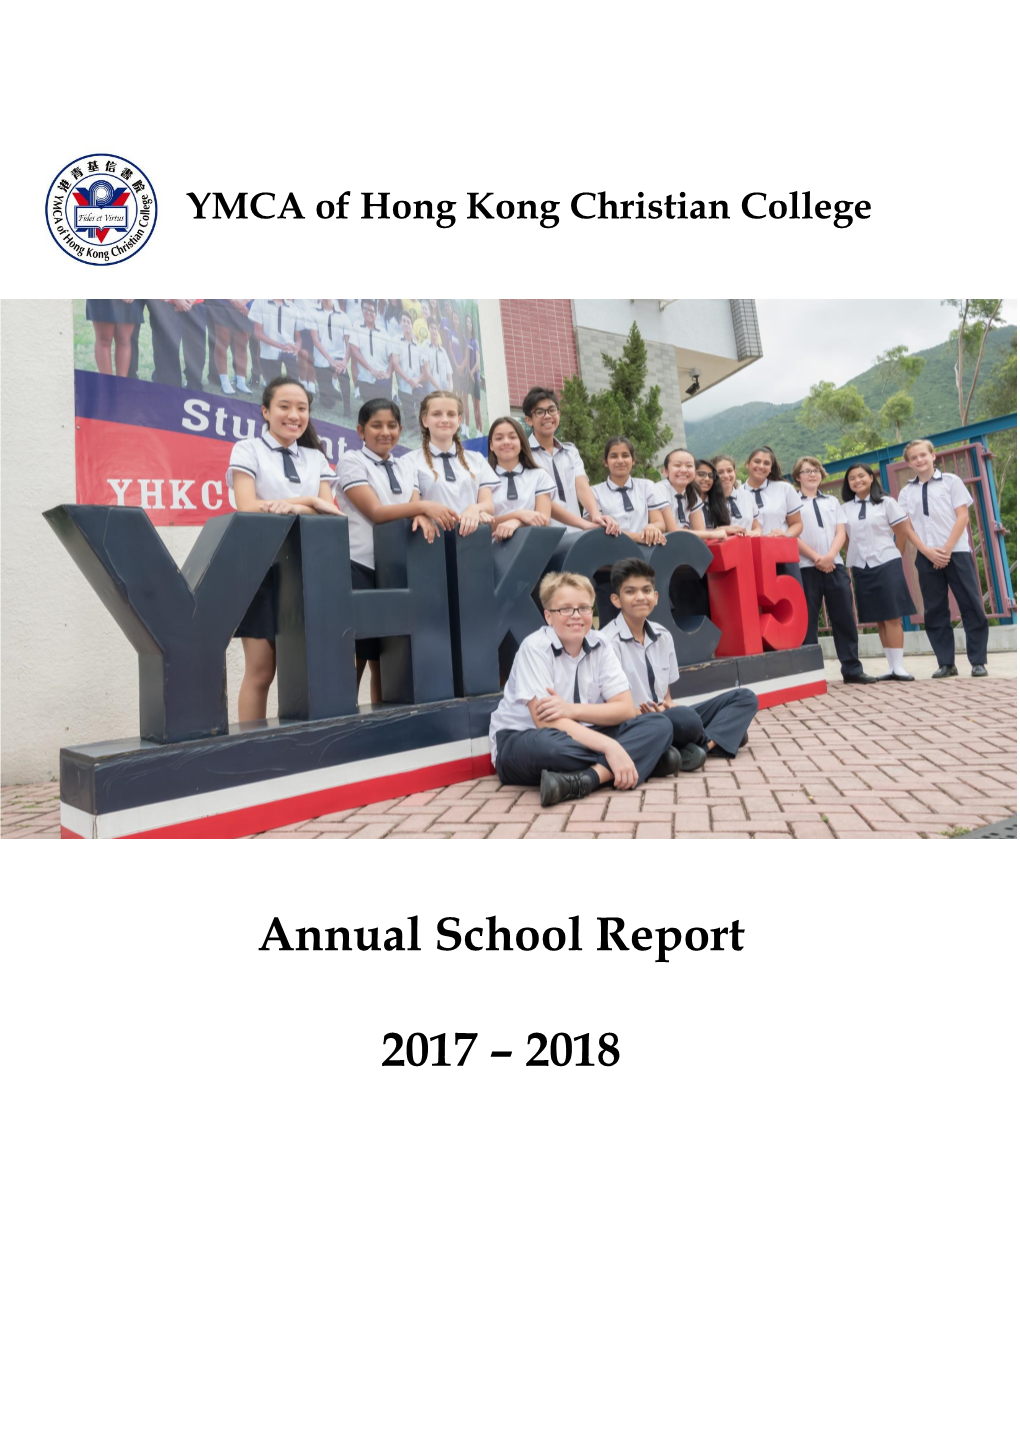 Annual School Report 2017 – 2018 Page 2